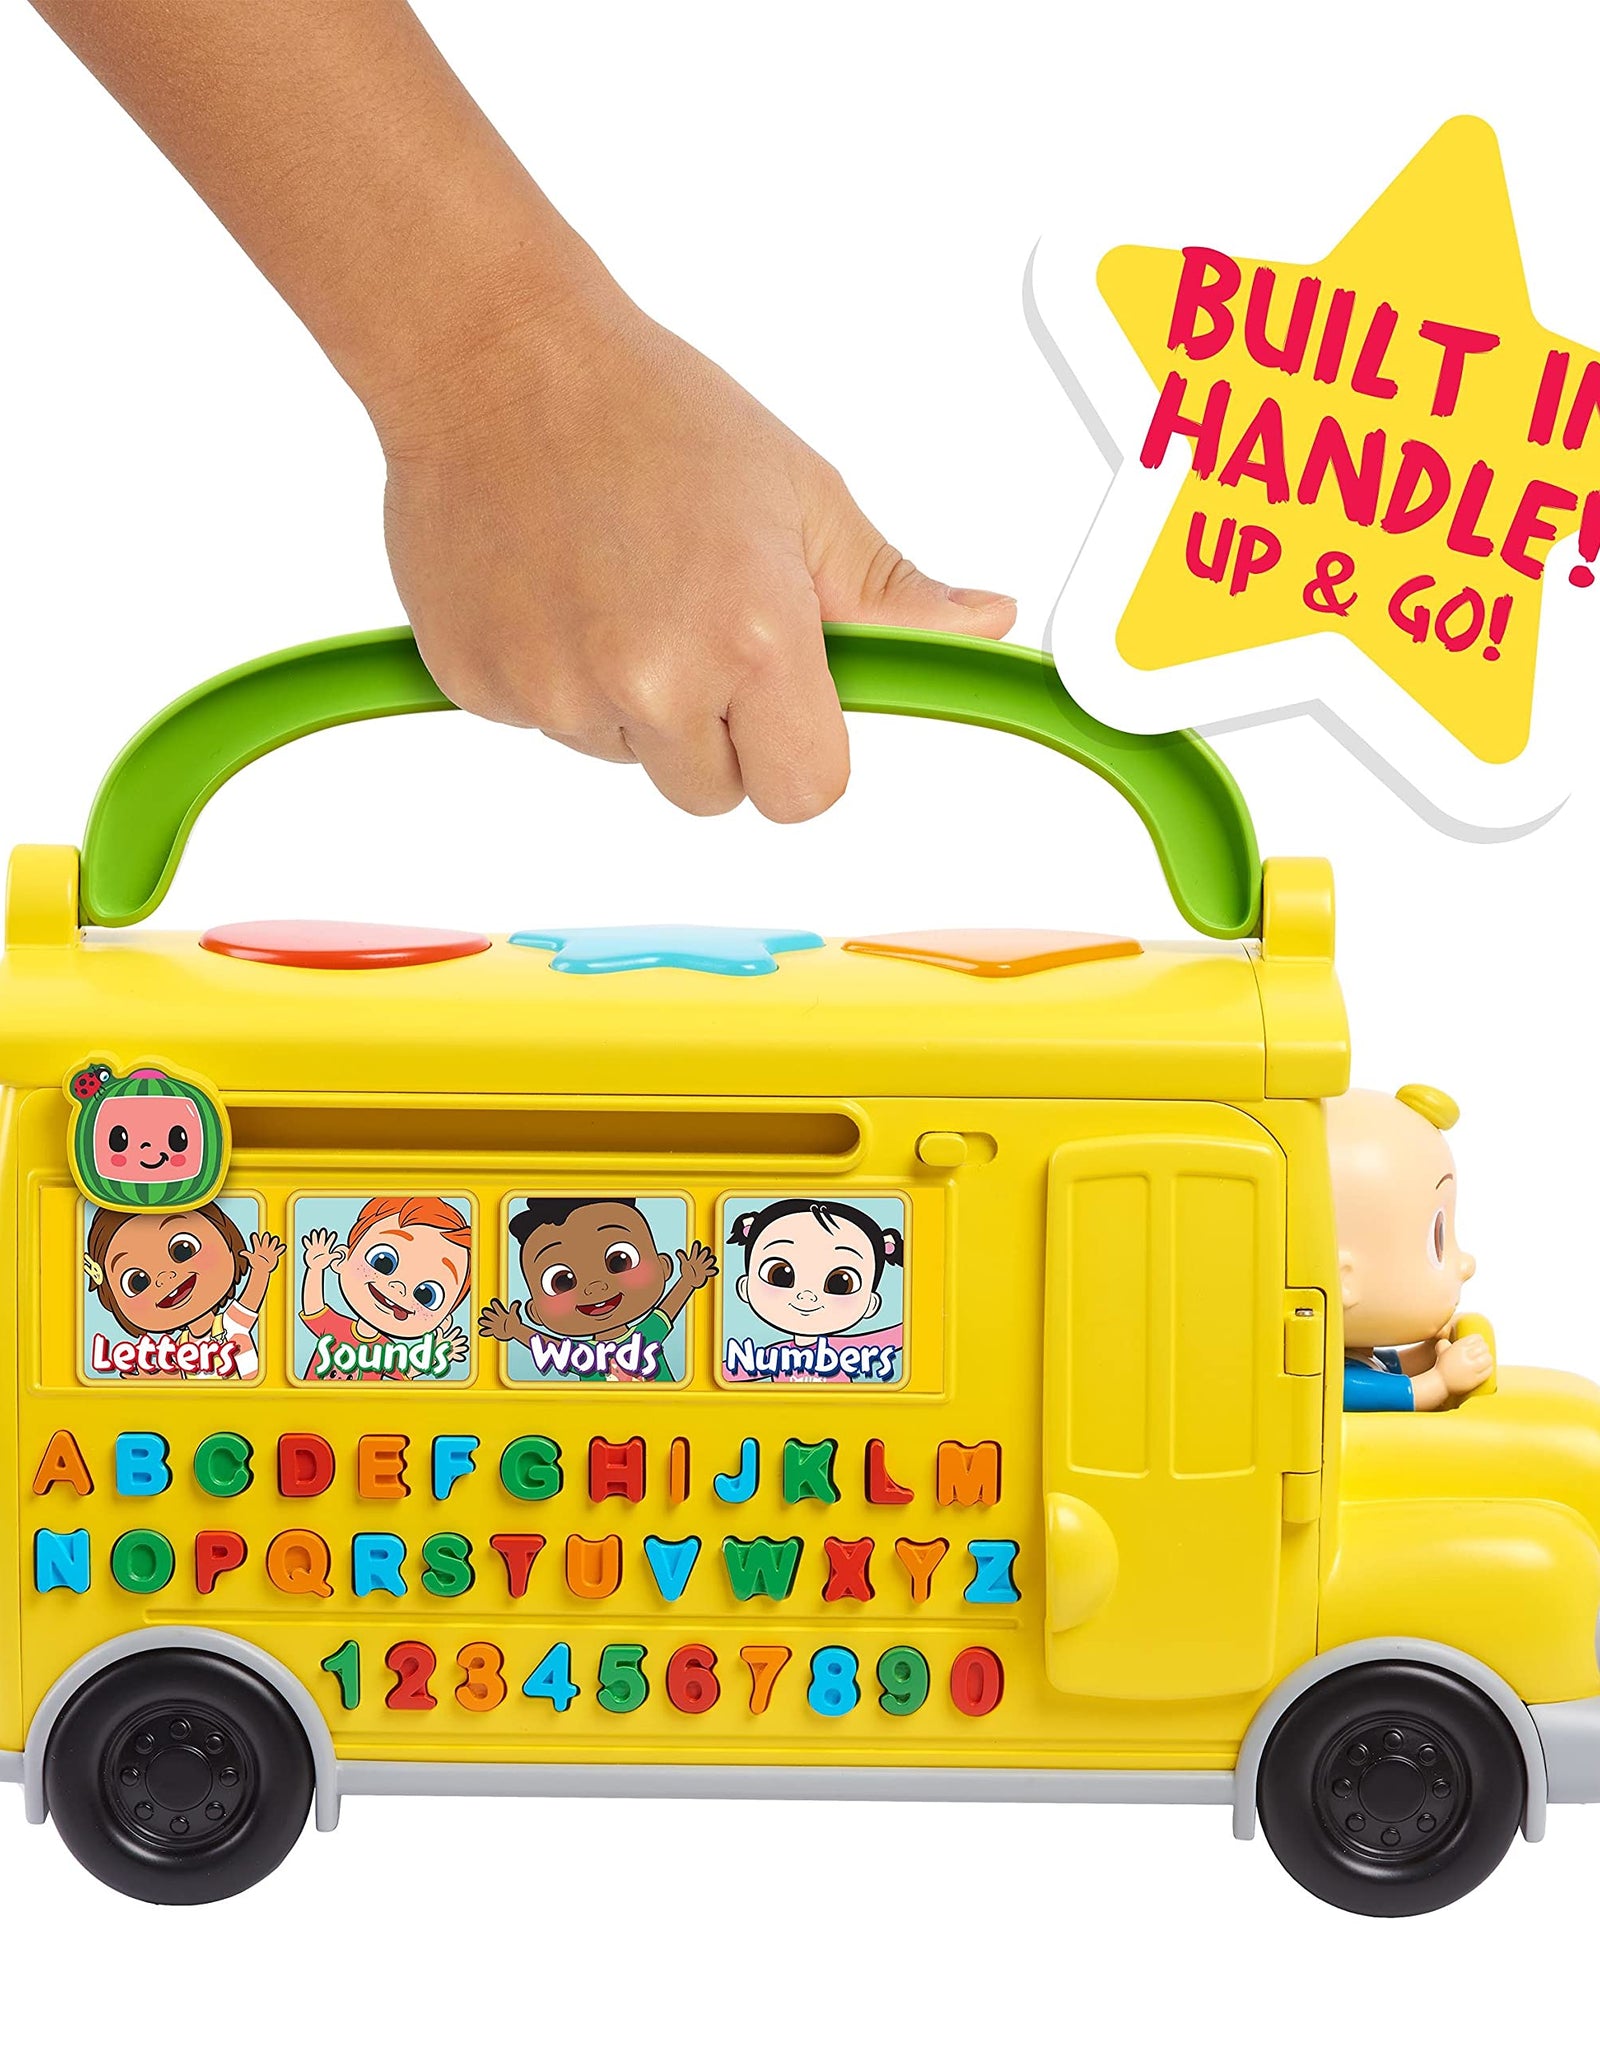 CoComelon Musical Learning Bus, Number and Letter Recognition, Phonetics, Yellow School Bus Toy Plays ABCs and Wheels on the Bus, by Just Play